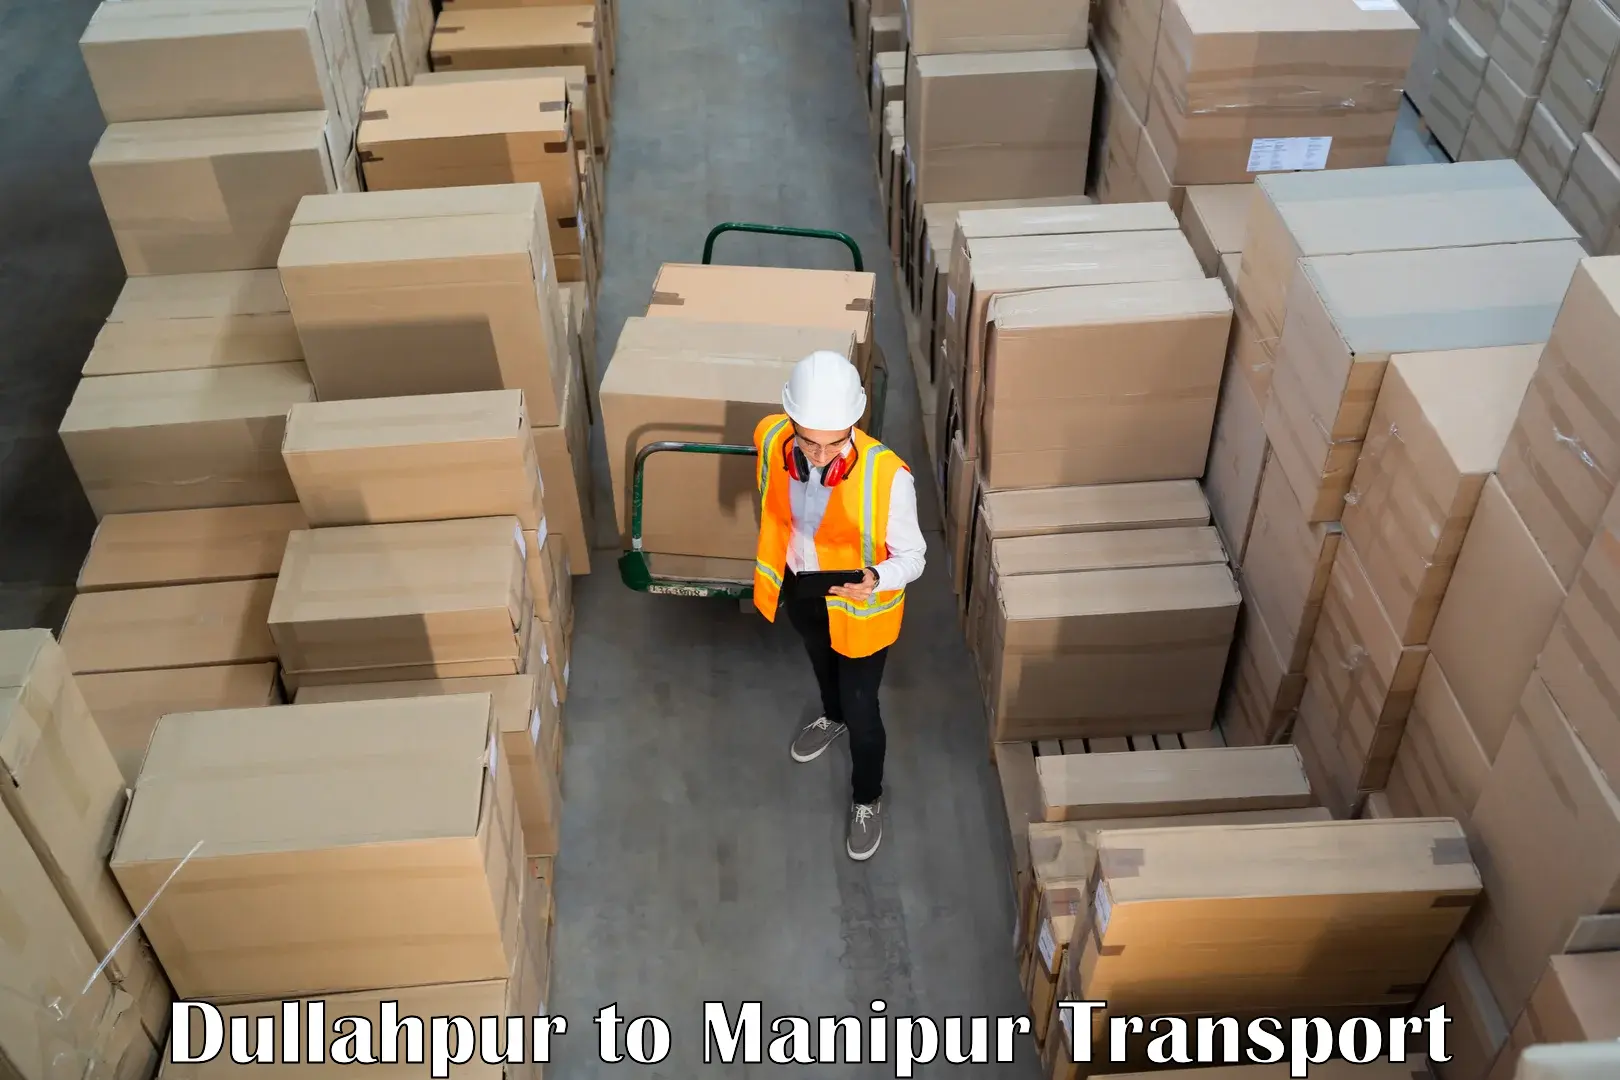 Express transport services Dullahpur to Imphal